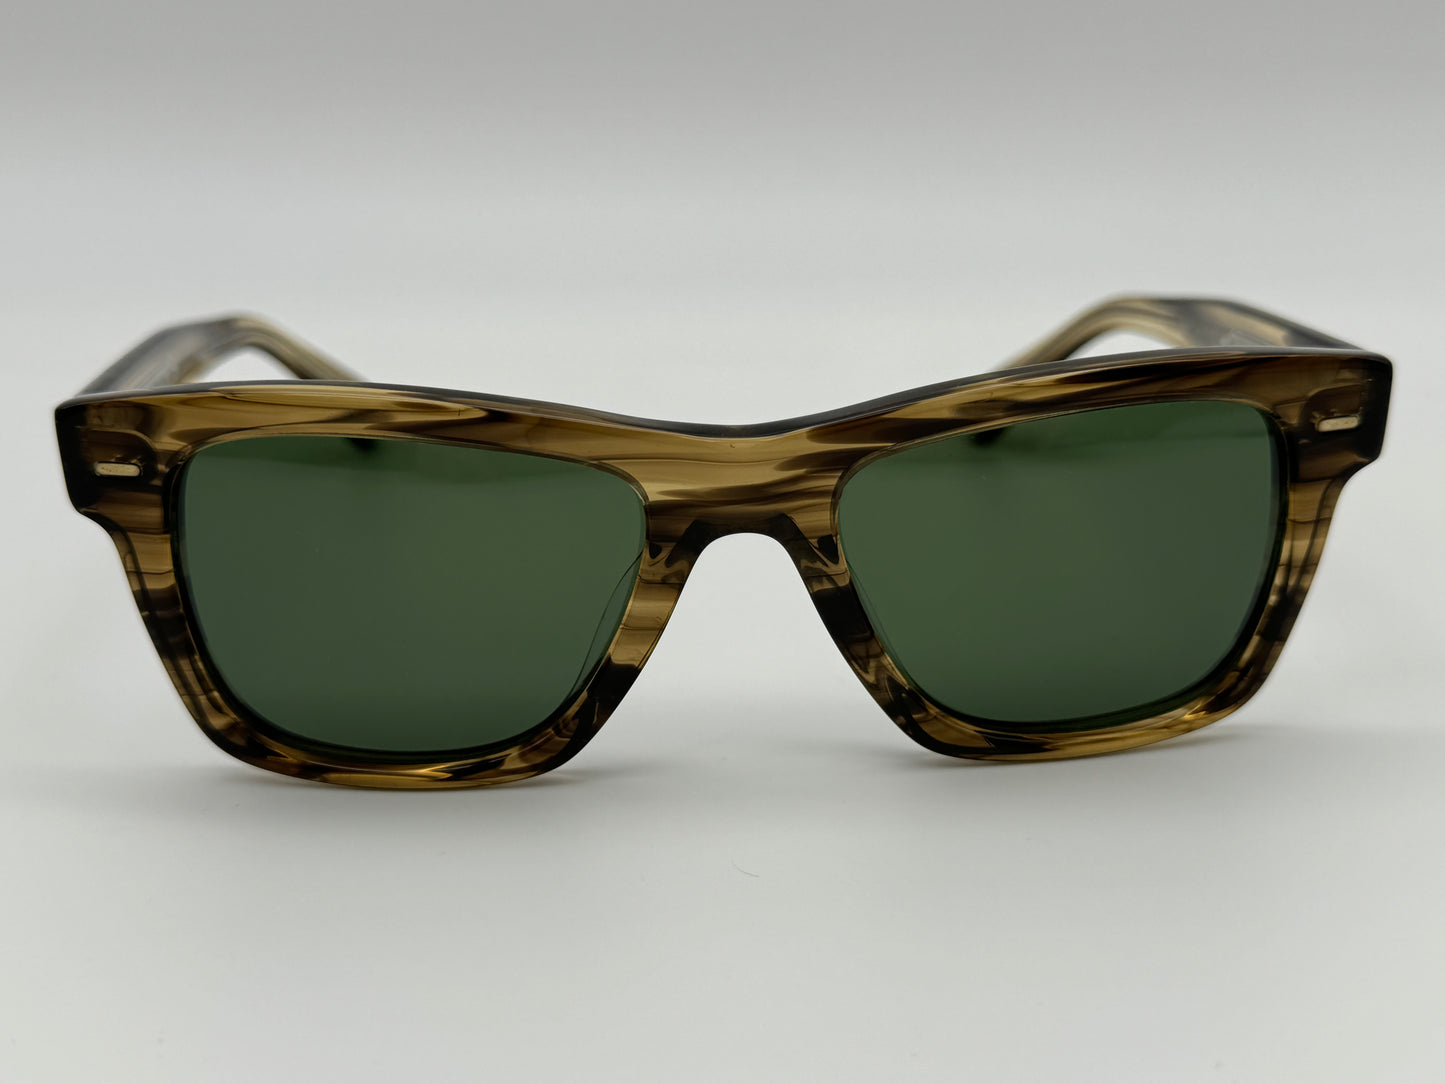 Oliver Peoples Oliver Sun Exclusive Brunello Cucinelli 51mm Olive Smoke G15 OV5393su 171952 New Display Missing Box